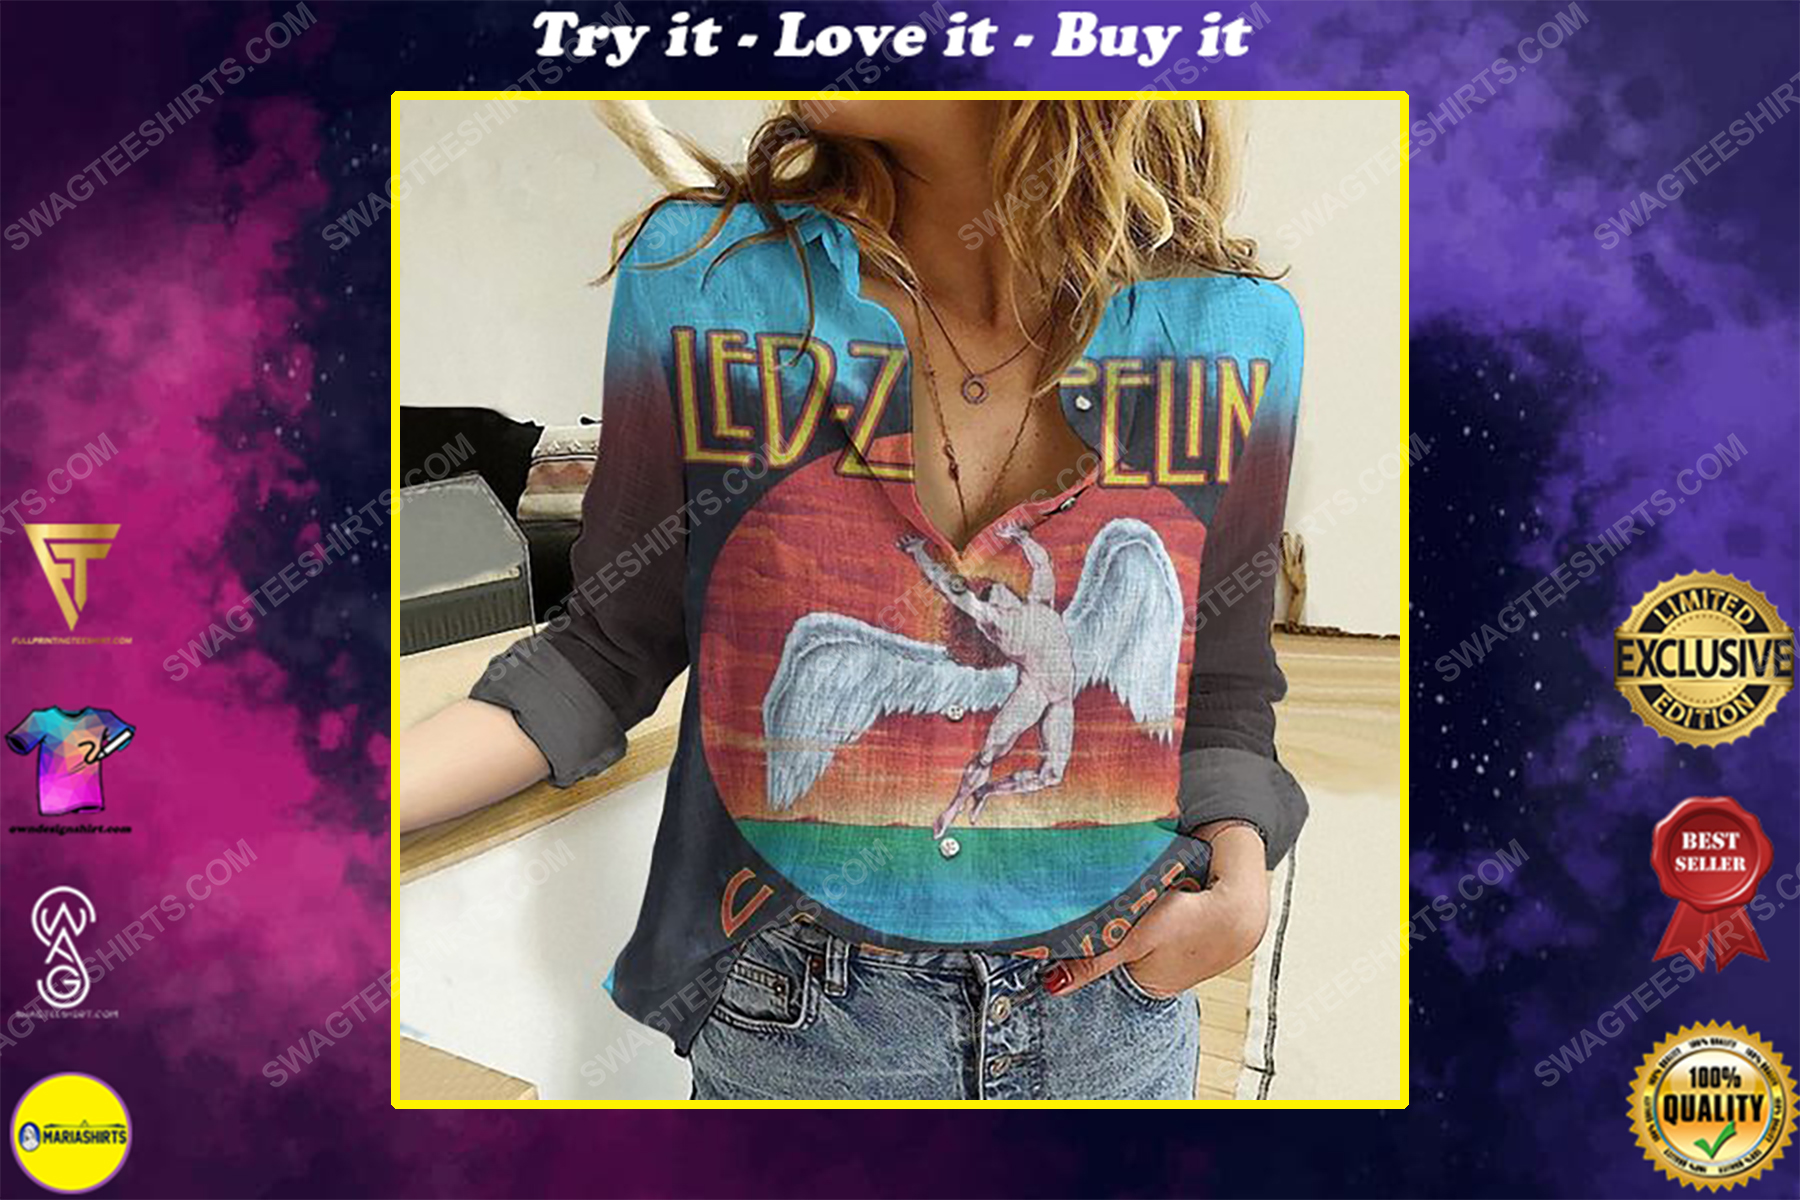 Led zeppelin fully printed poly cotton casual shirt